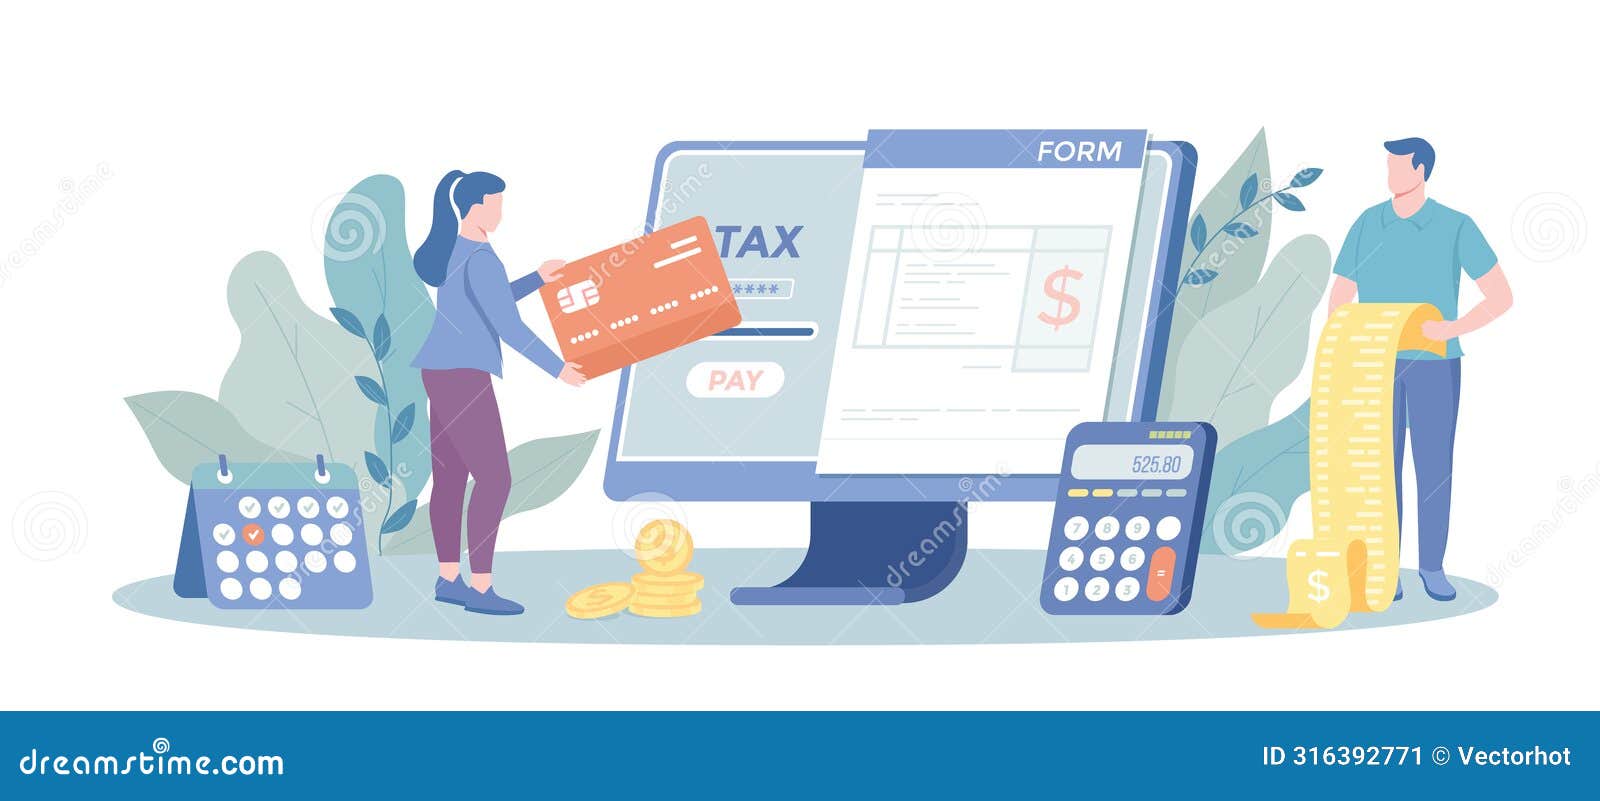 online tax filing service. tax software program, irs form, personal income, money refund, gather paperwork.  